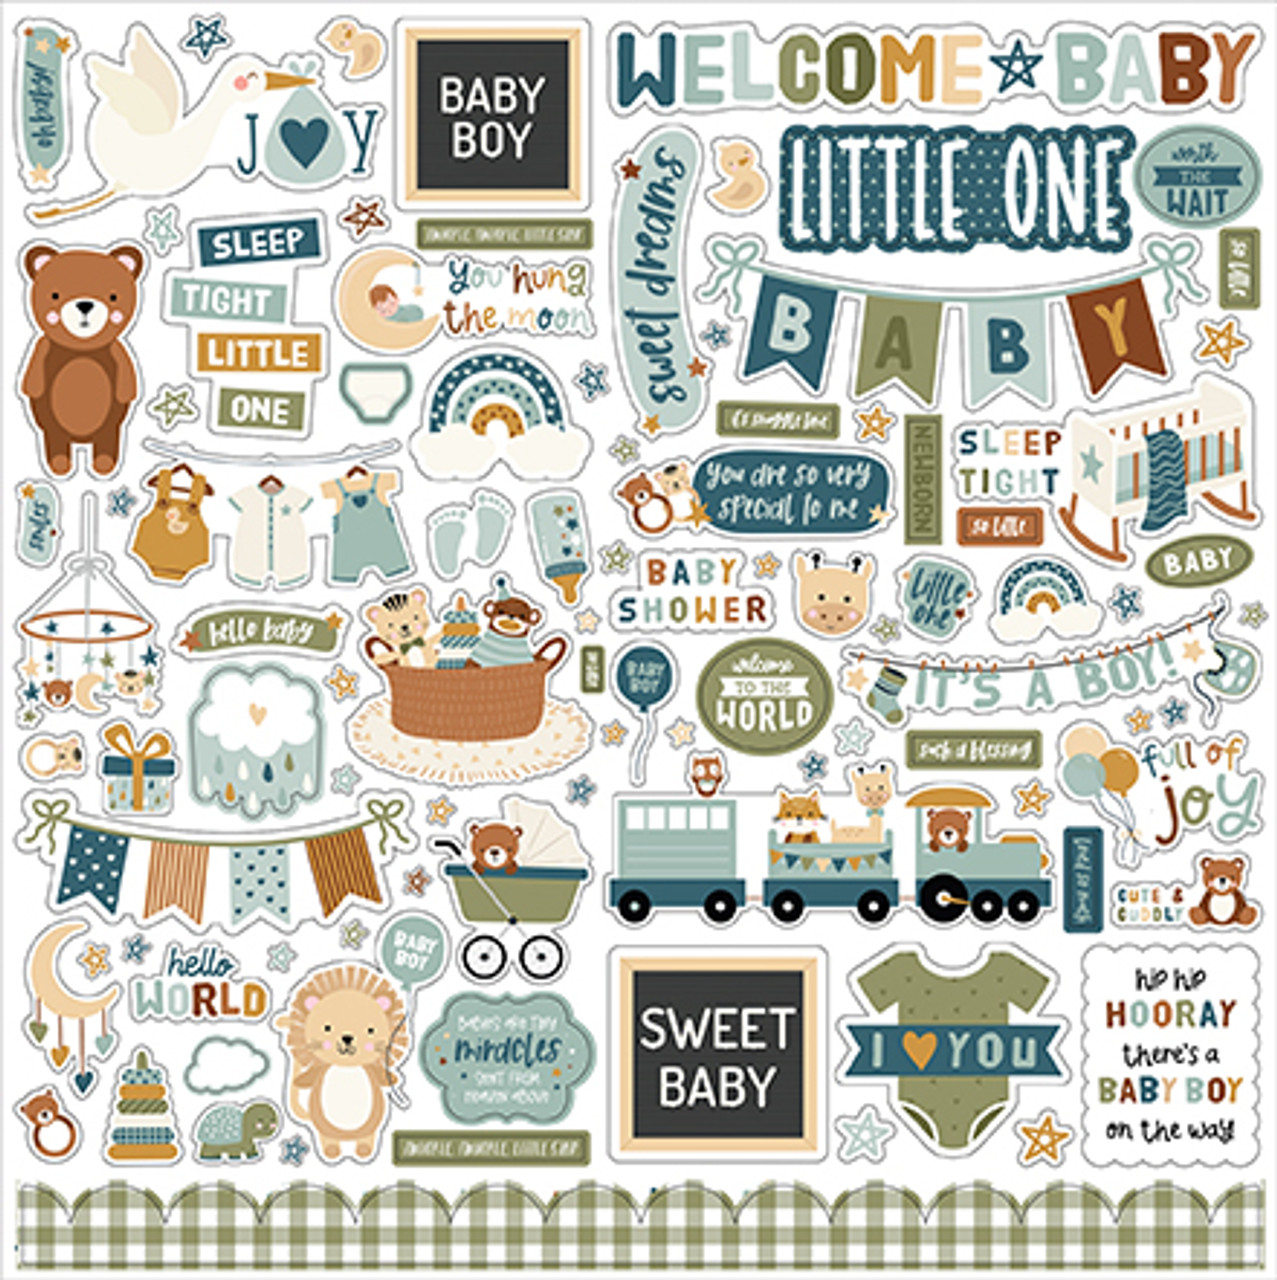 Echo Park - Our Baby Boy - Frames & Tags